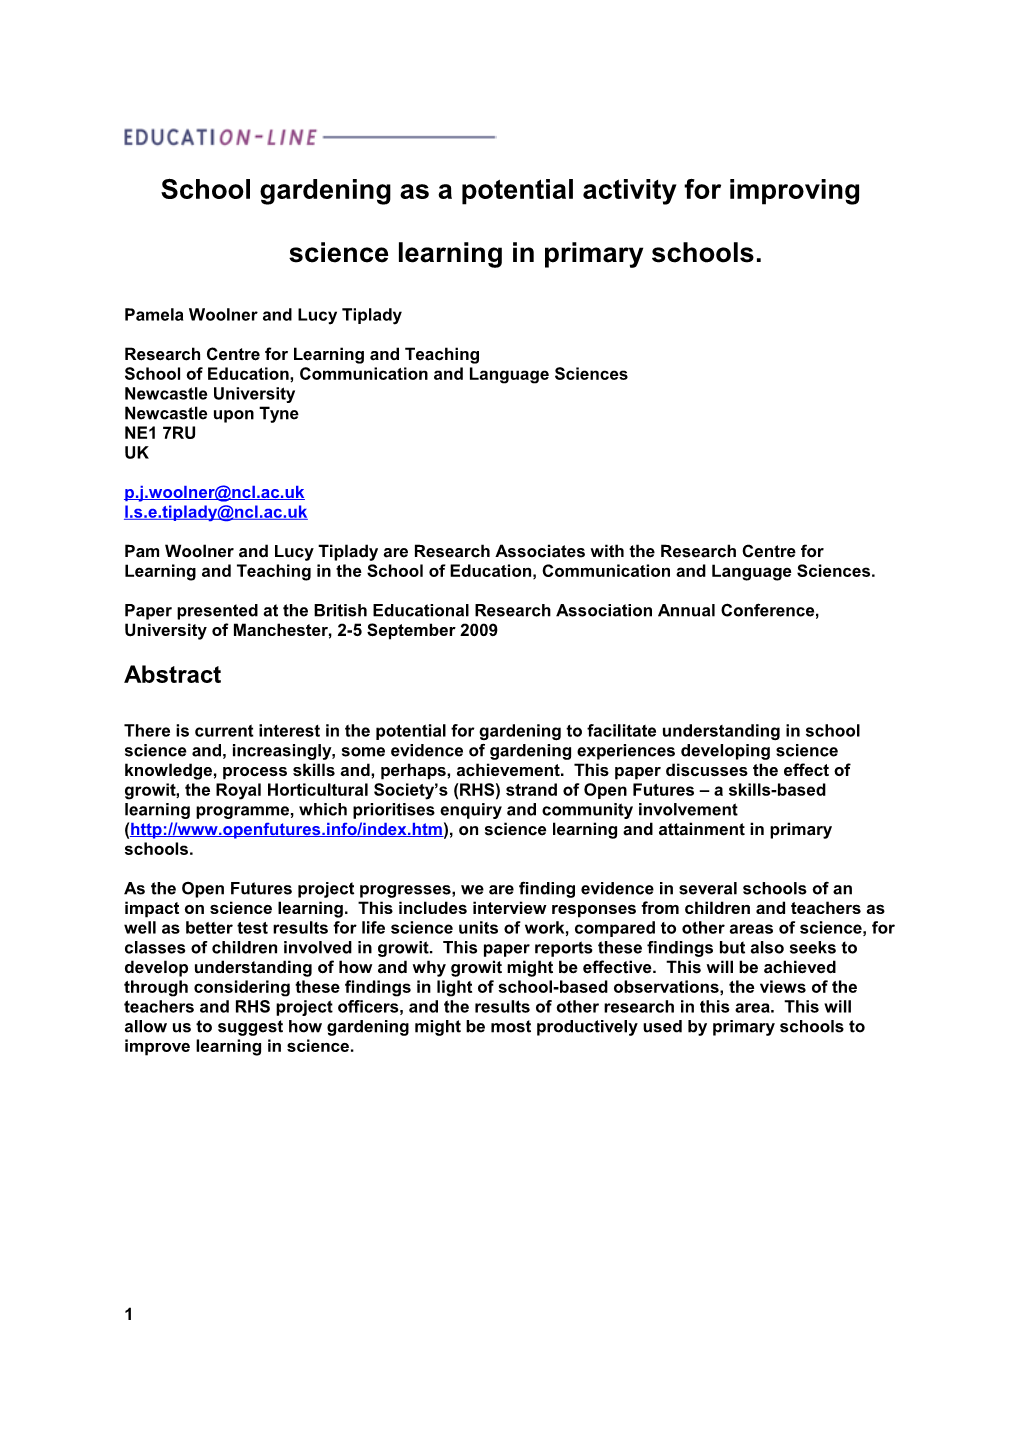 School Gardening As a Potential Activity for Improving Science Learning in Primary Schools